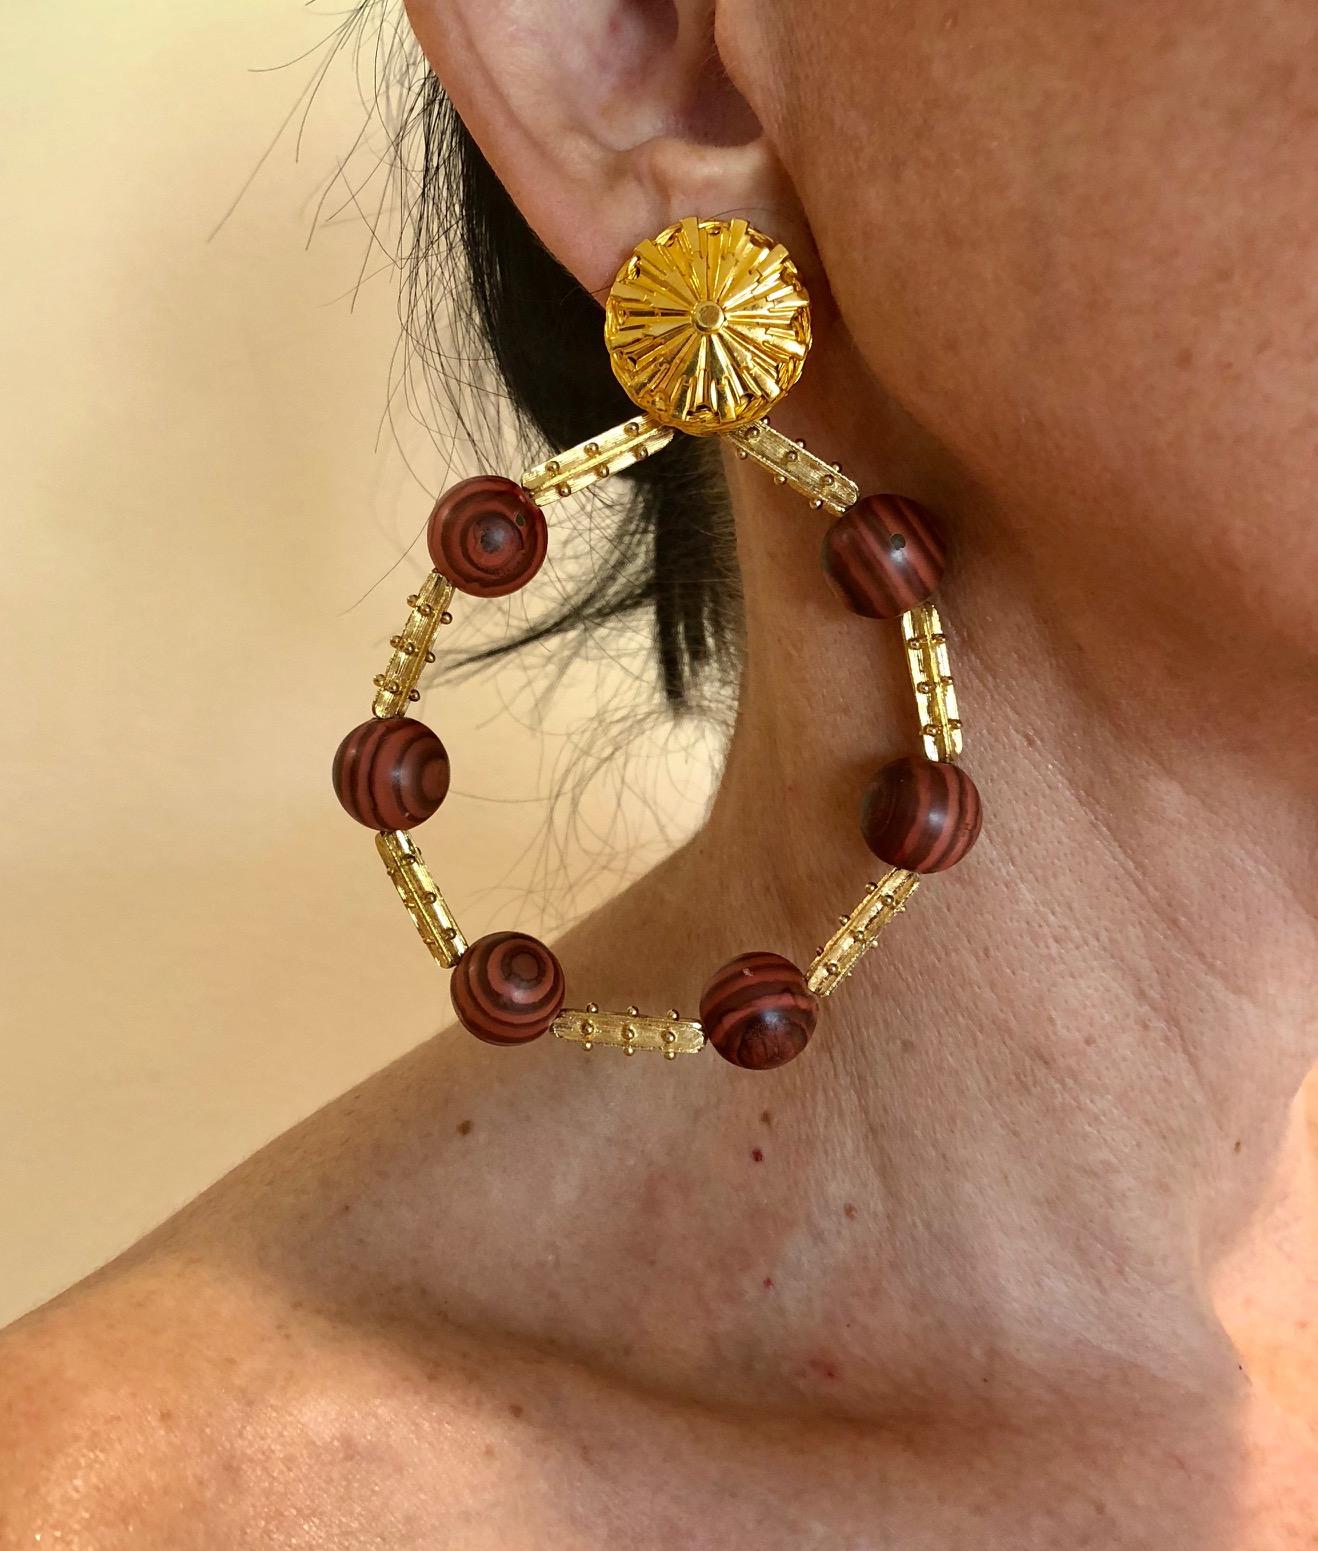 Vintage oversized clip-on hoop earrings by the House of de Lillo. The round statement clip-on statement earrings are comprised of long gilt metal beads which are accented by six genuine exotic patinaed bamboo round beads. They are lightweight and